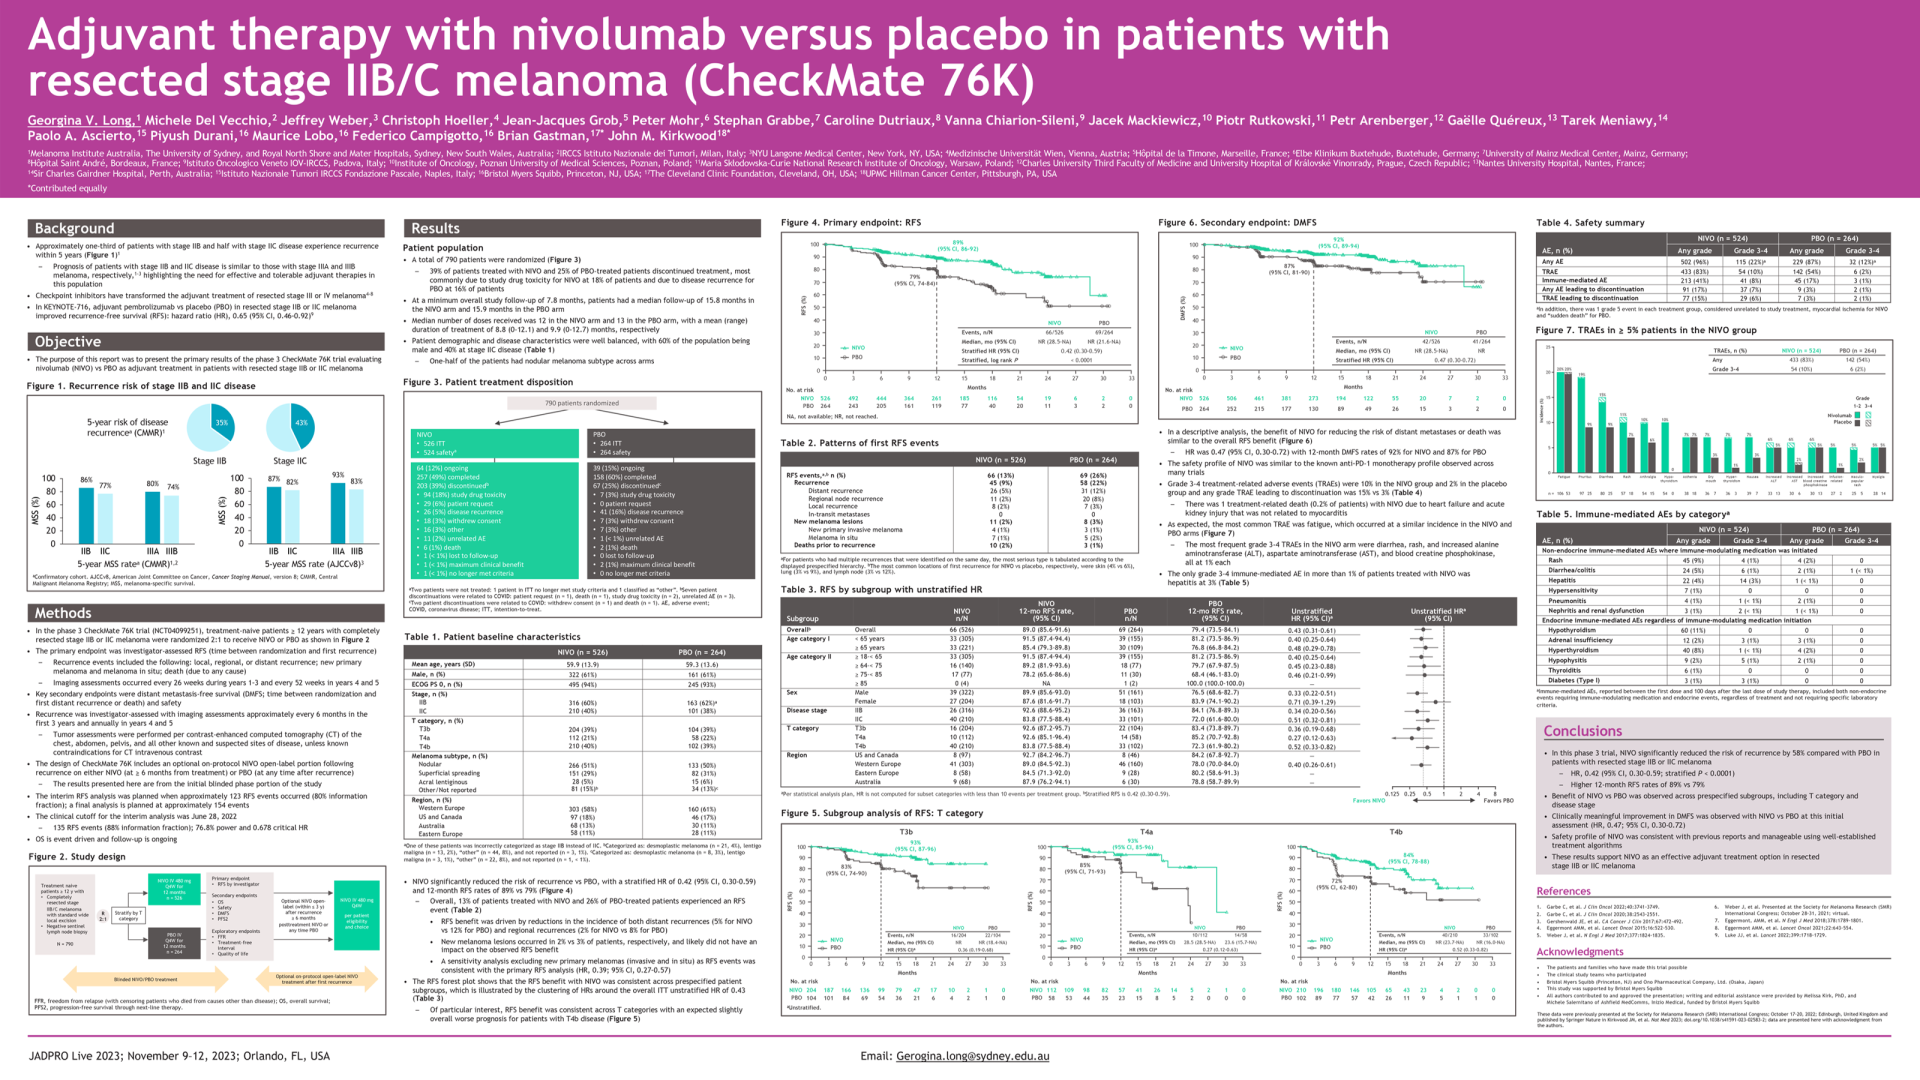 JL1101ES: Adjuvant therapy with nivolumab versus placebo in patients with resected stage IIB/C melanoma (CheckMate 76K) icon